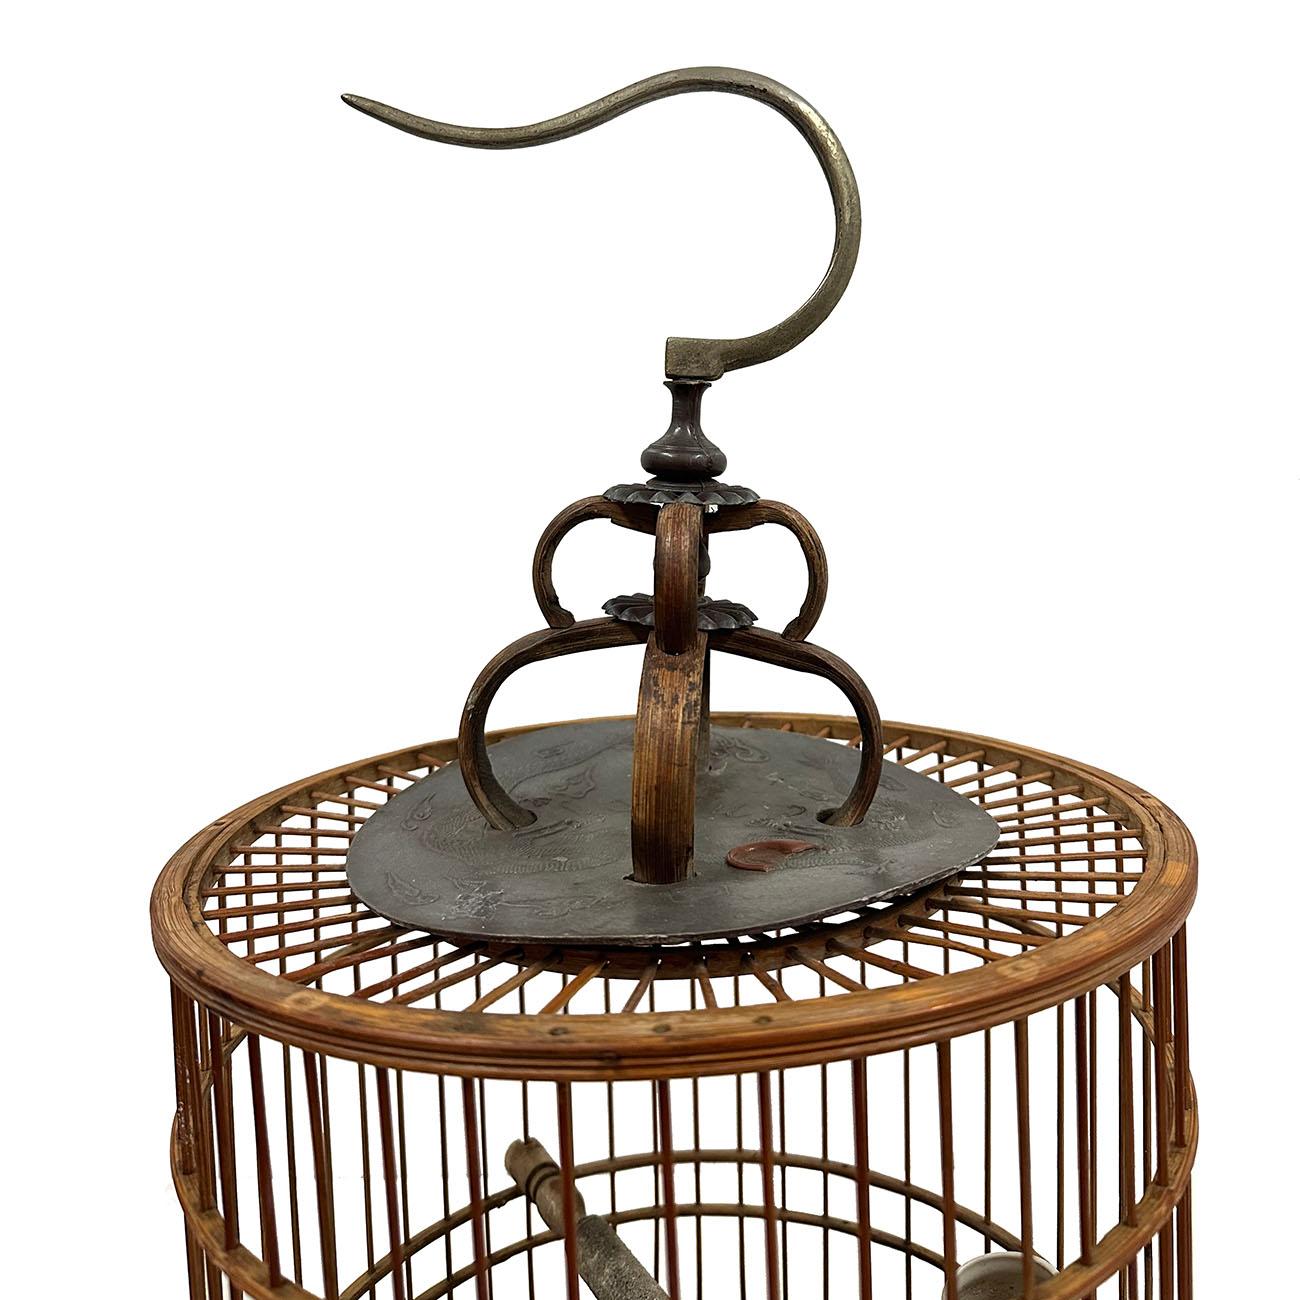 This beautiful bird cage is made from bamboo strip with wonderful carving works at bottom. The even distribution of each bar around the cage and the precise of each joining point show the beauty and elegant of the piece. All hand made and hand